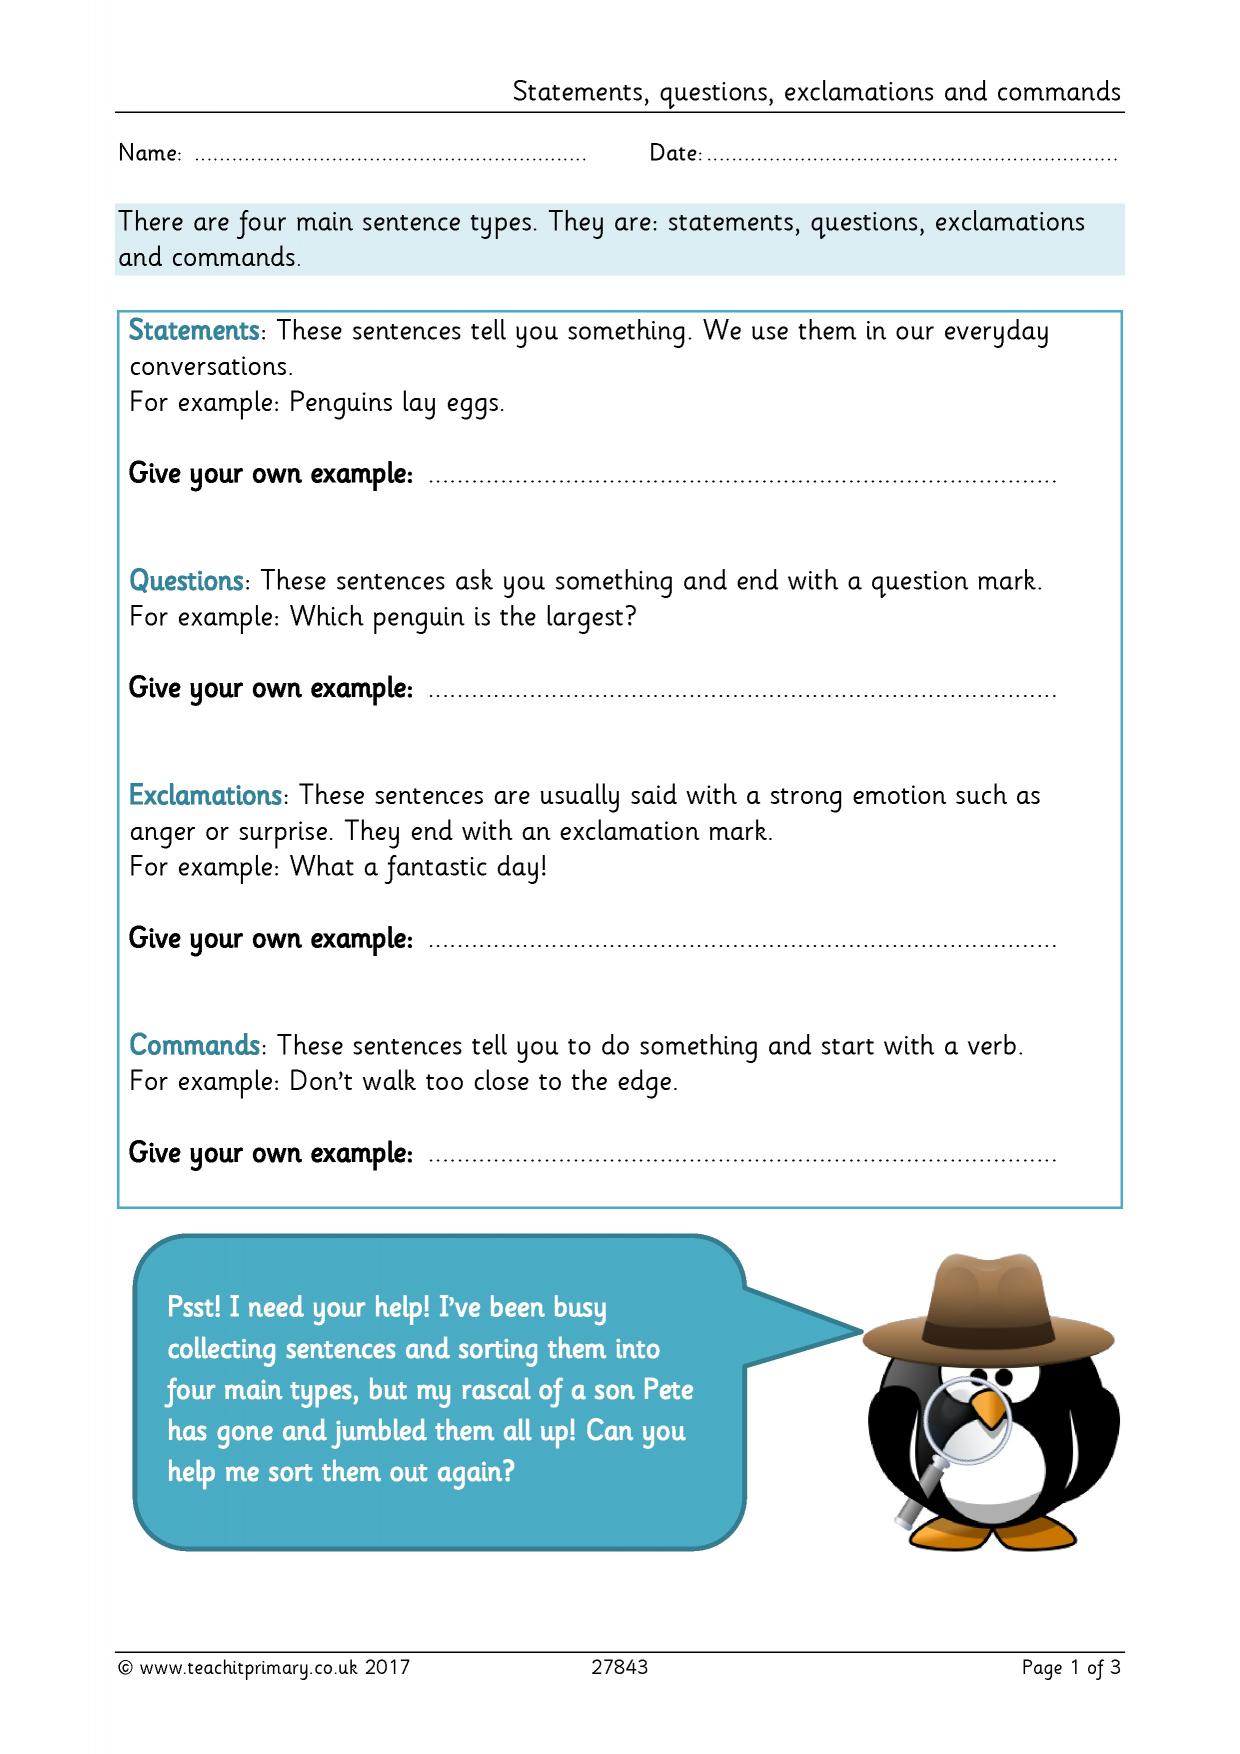 statements-questions-exclamations-and-commands-english-ks1-teachit